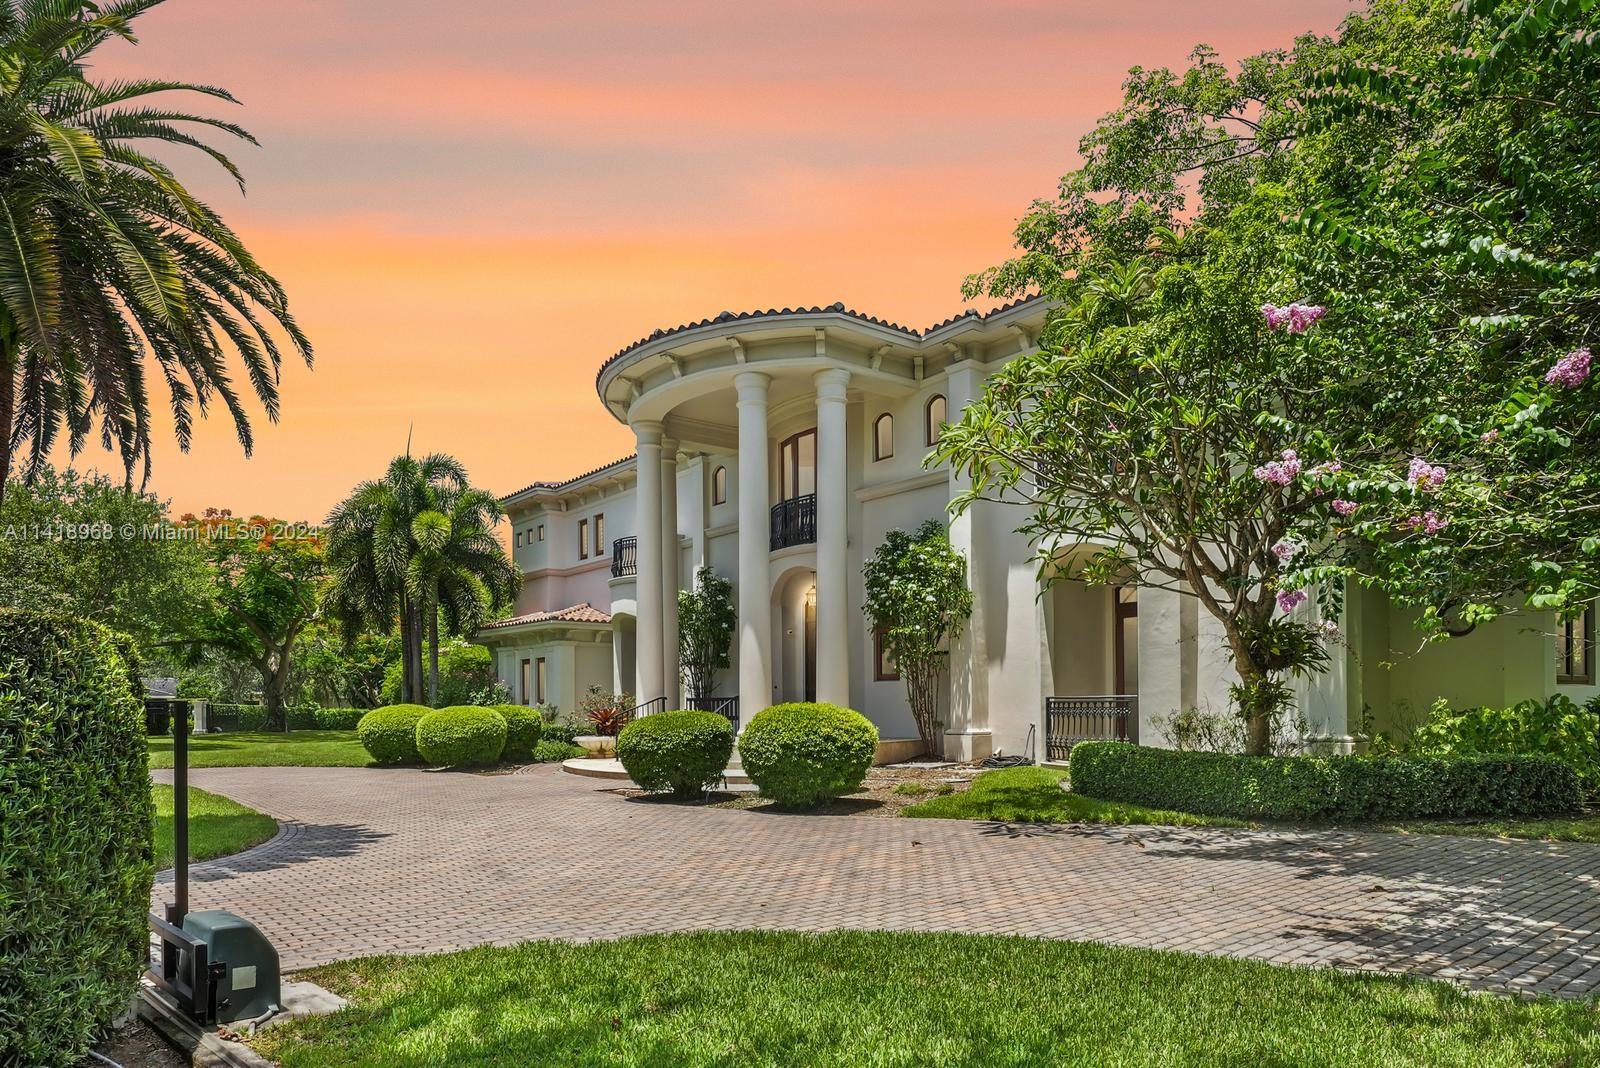 Welcome to Villa di Vista, an exquisite masterpiece in Pinecrest, FL. Custom-built with meticulous craftsmanship, this almost 10,000 sqft estate with elevator exudes refined charm and sophistication. High ceilings and natural light fill the living areas, while the main suite offers a cozy sanctuary with a spa-like bathroom. Outside, enjoy the private oasis with a stately pool, covered patio, and outdoor entertainment area. Pinecrest provides access to renowned schools, upscale shopping, and fine dining. Experience luxury living and exclusivity at Villa di Vista. Tour it today and let this magnificent home capture your heart. Make it Rein!